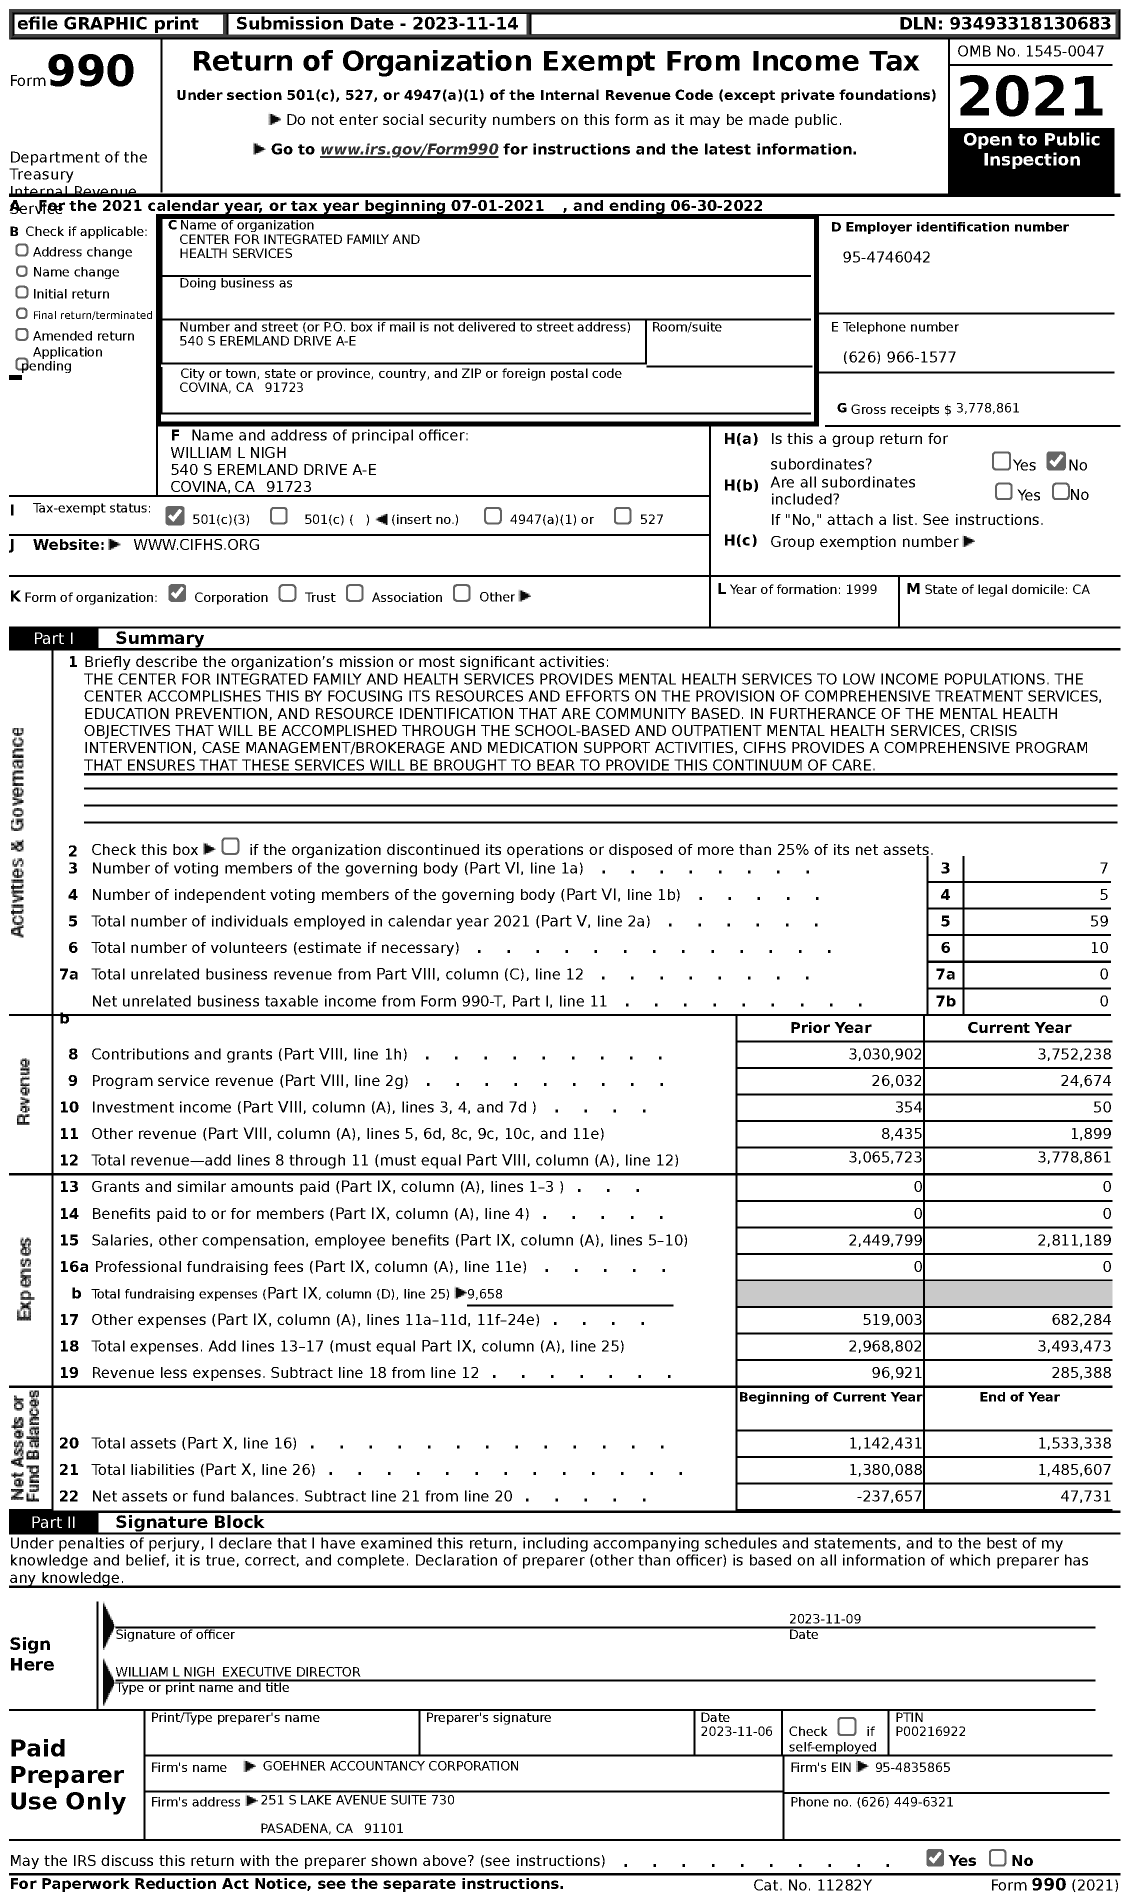 Image of first page of 2021 Form 990 for Center for Integrated Family and Health Services (CIFHS)